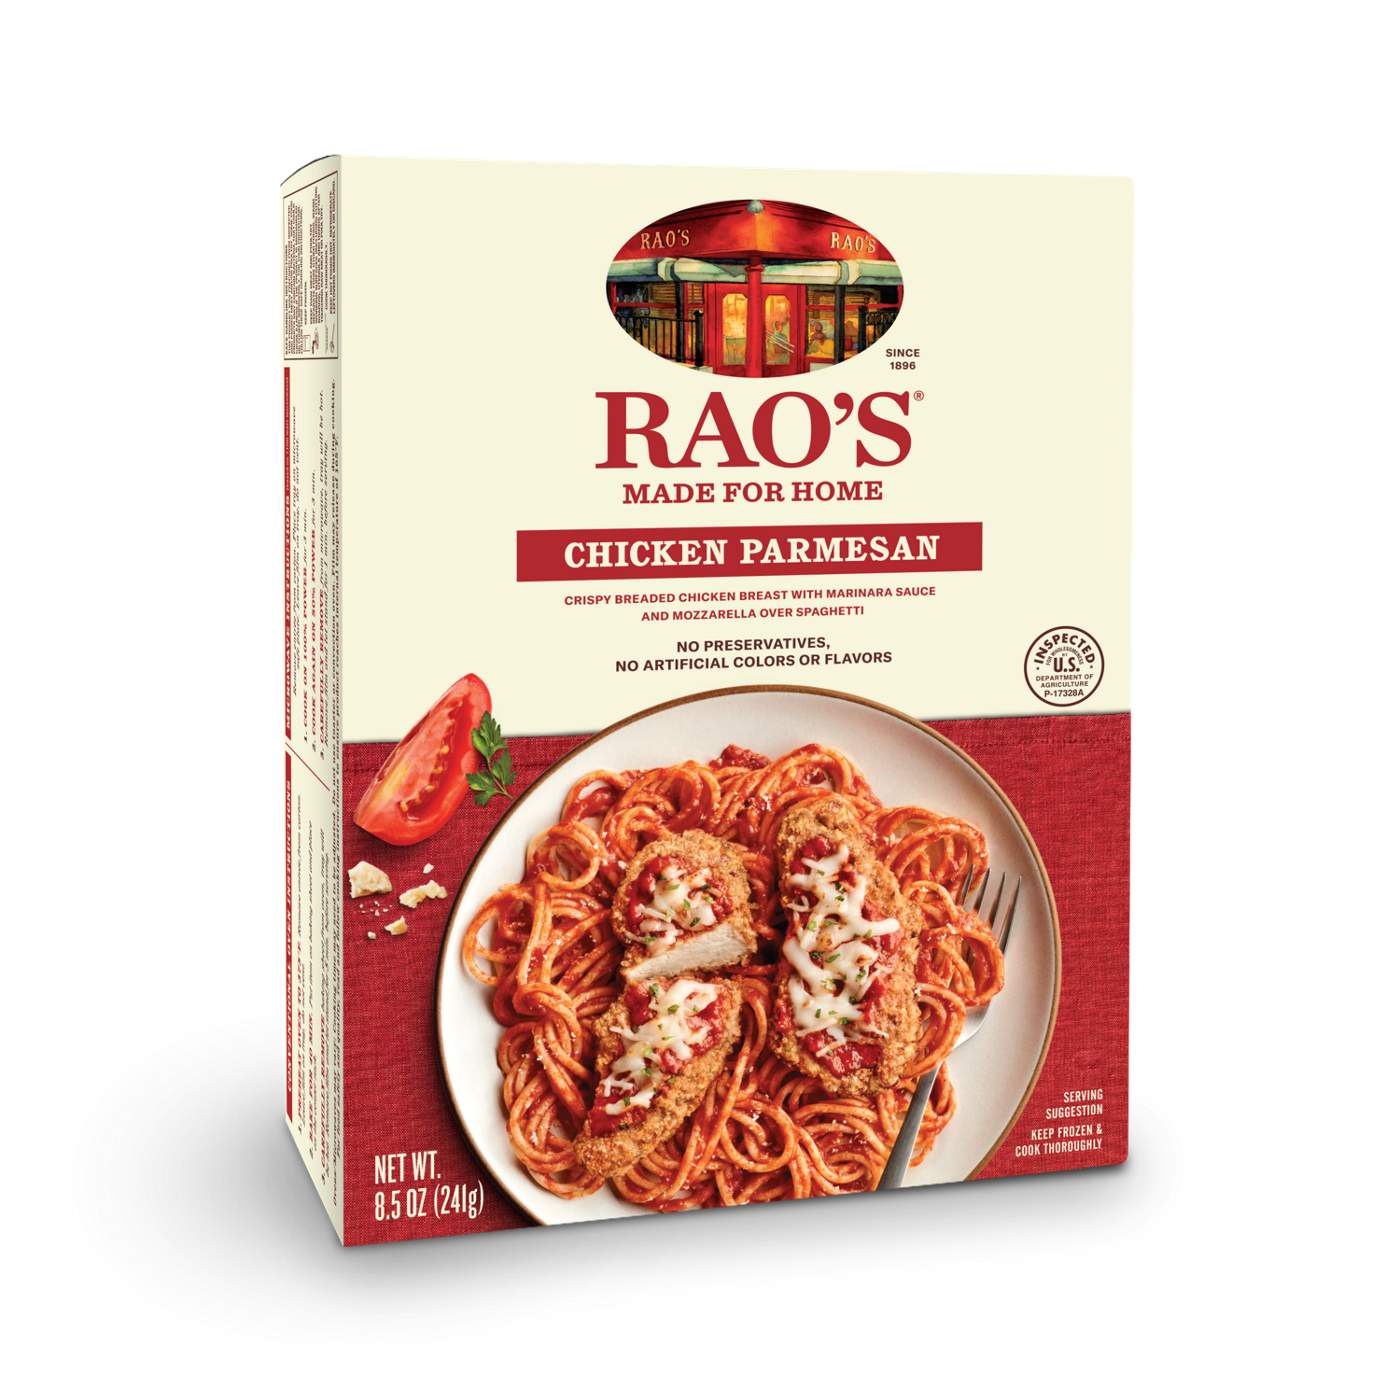 Rao's Chicken Parmesan Frozen Meal; image 2 of 2